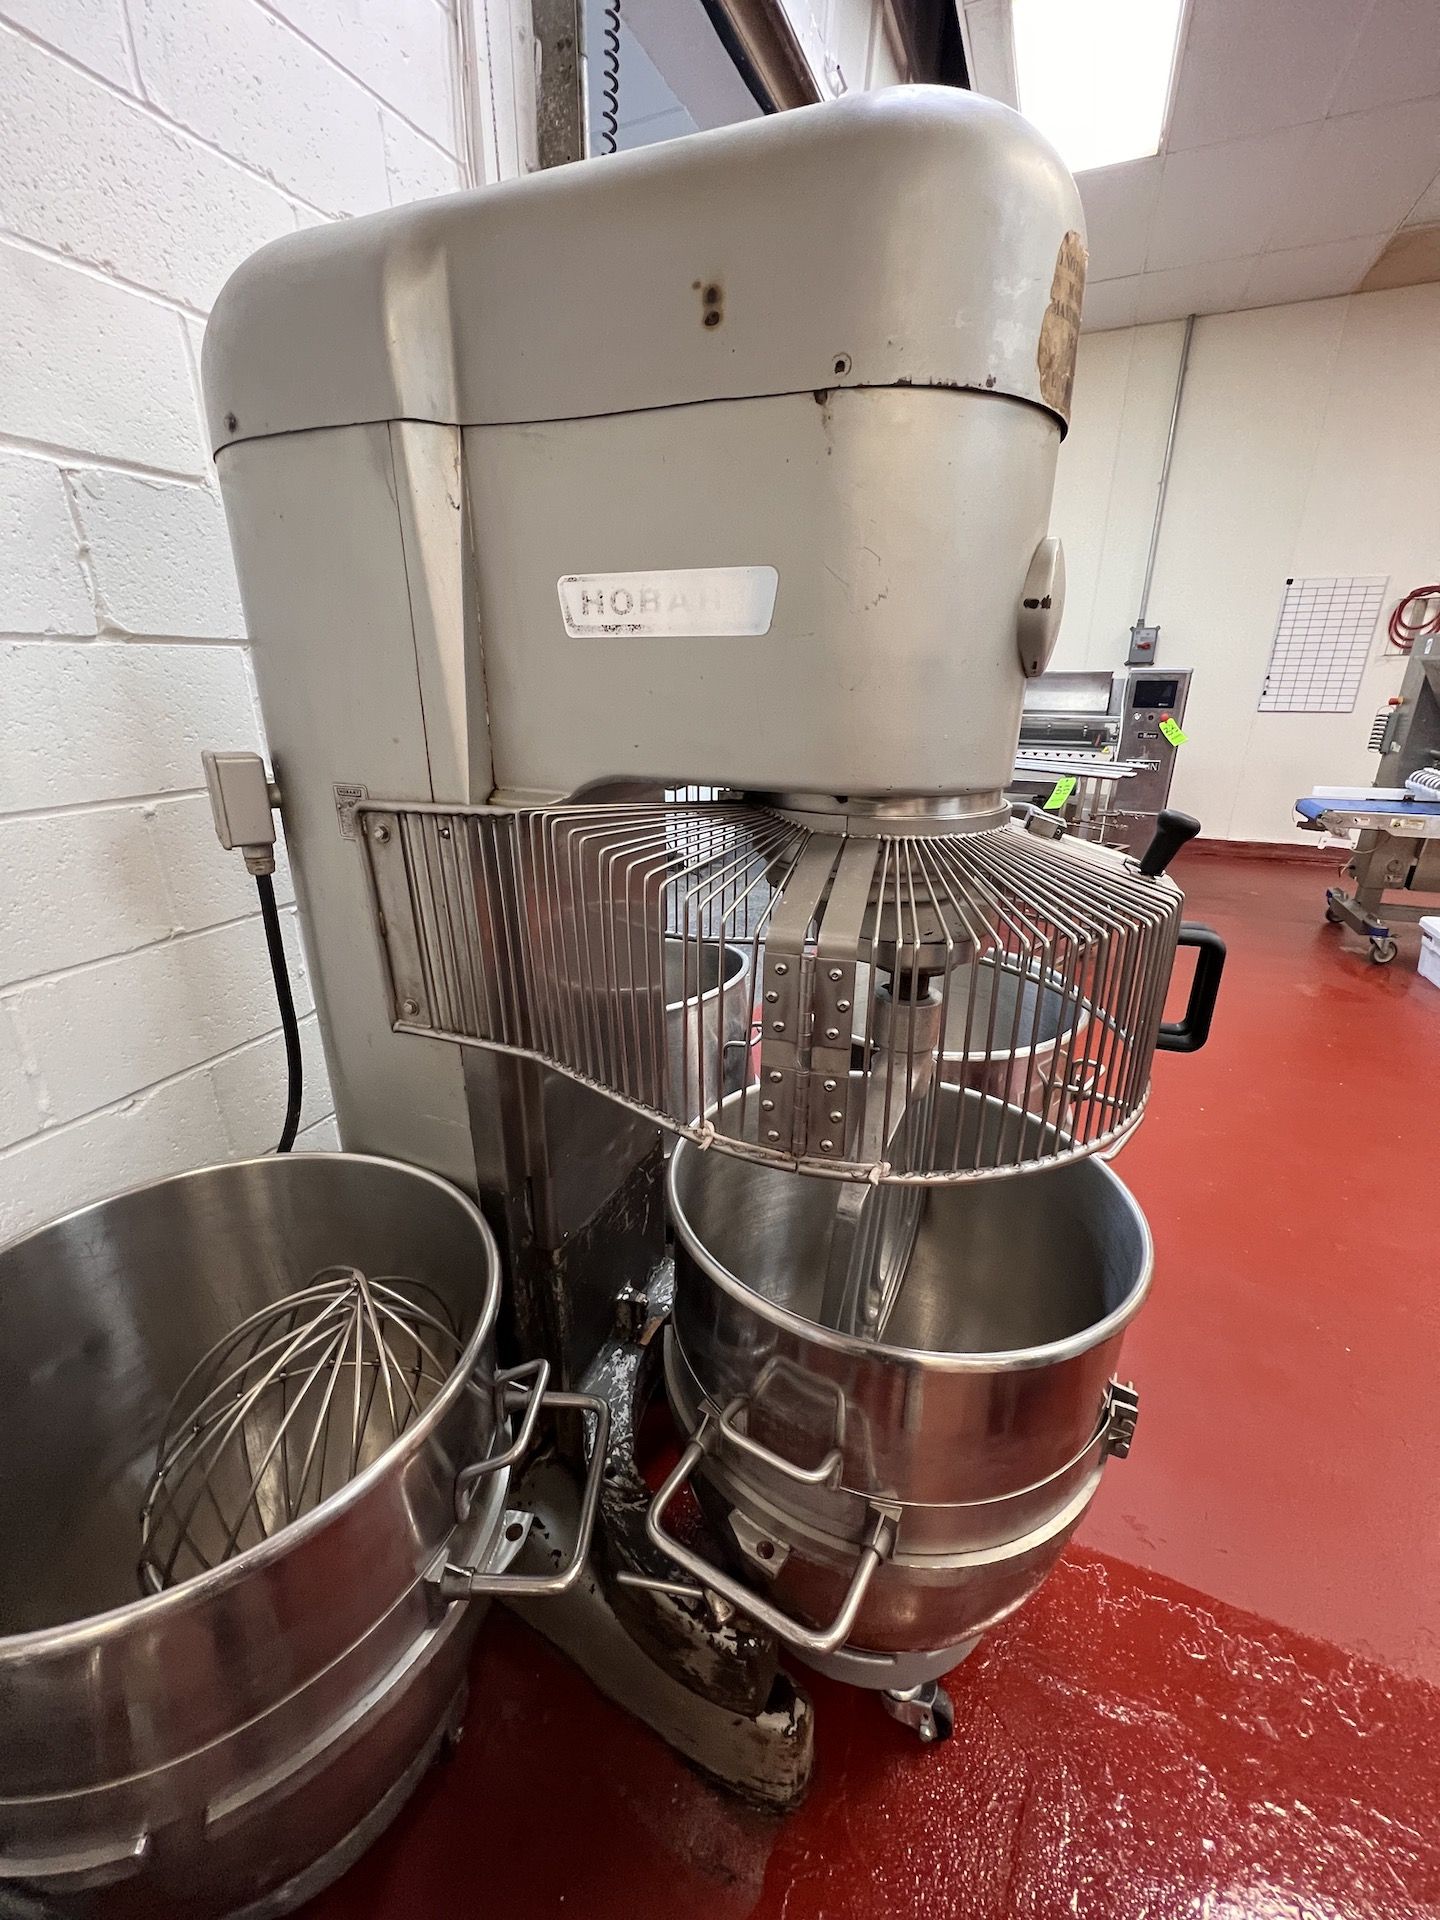 HOBART MIXER, MODEL Q1401, S/N 11-340-0, 140 QUART, WITH BEATER ATTACHMENT, MIXING BOWL AND DOLLY - Image 3 of 8